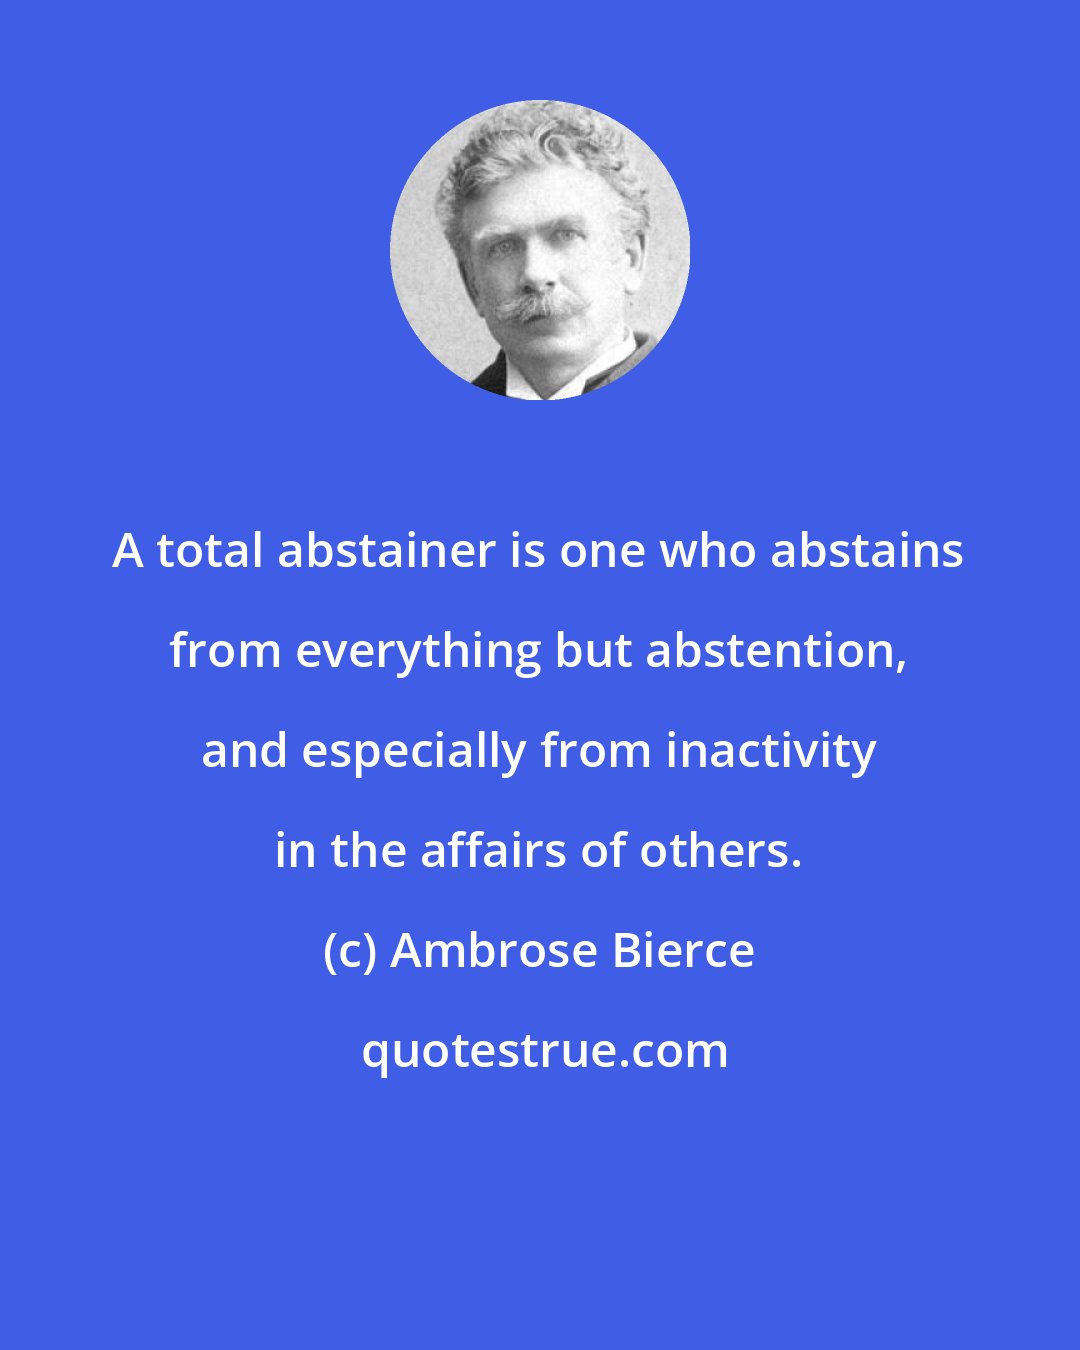 Ambrose Bierce: A total abstainer is one who abstains from everything but abstention, and especially from inactivity in the affairs of others.